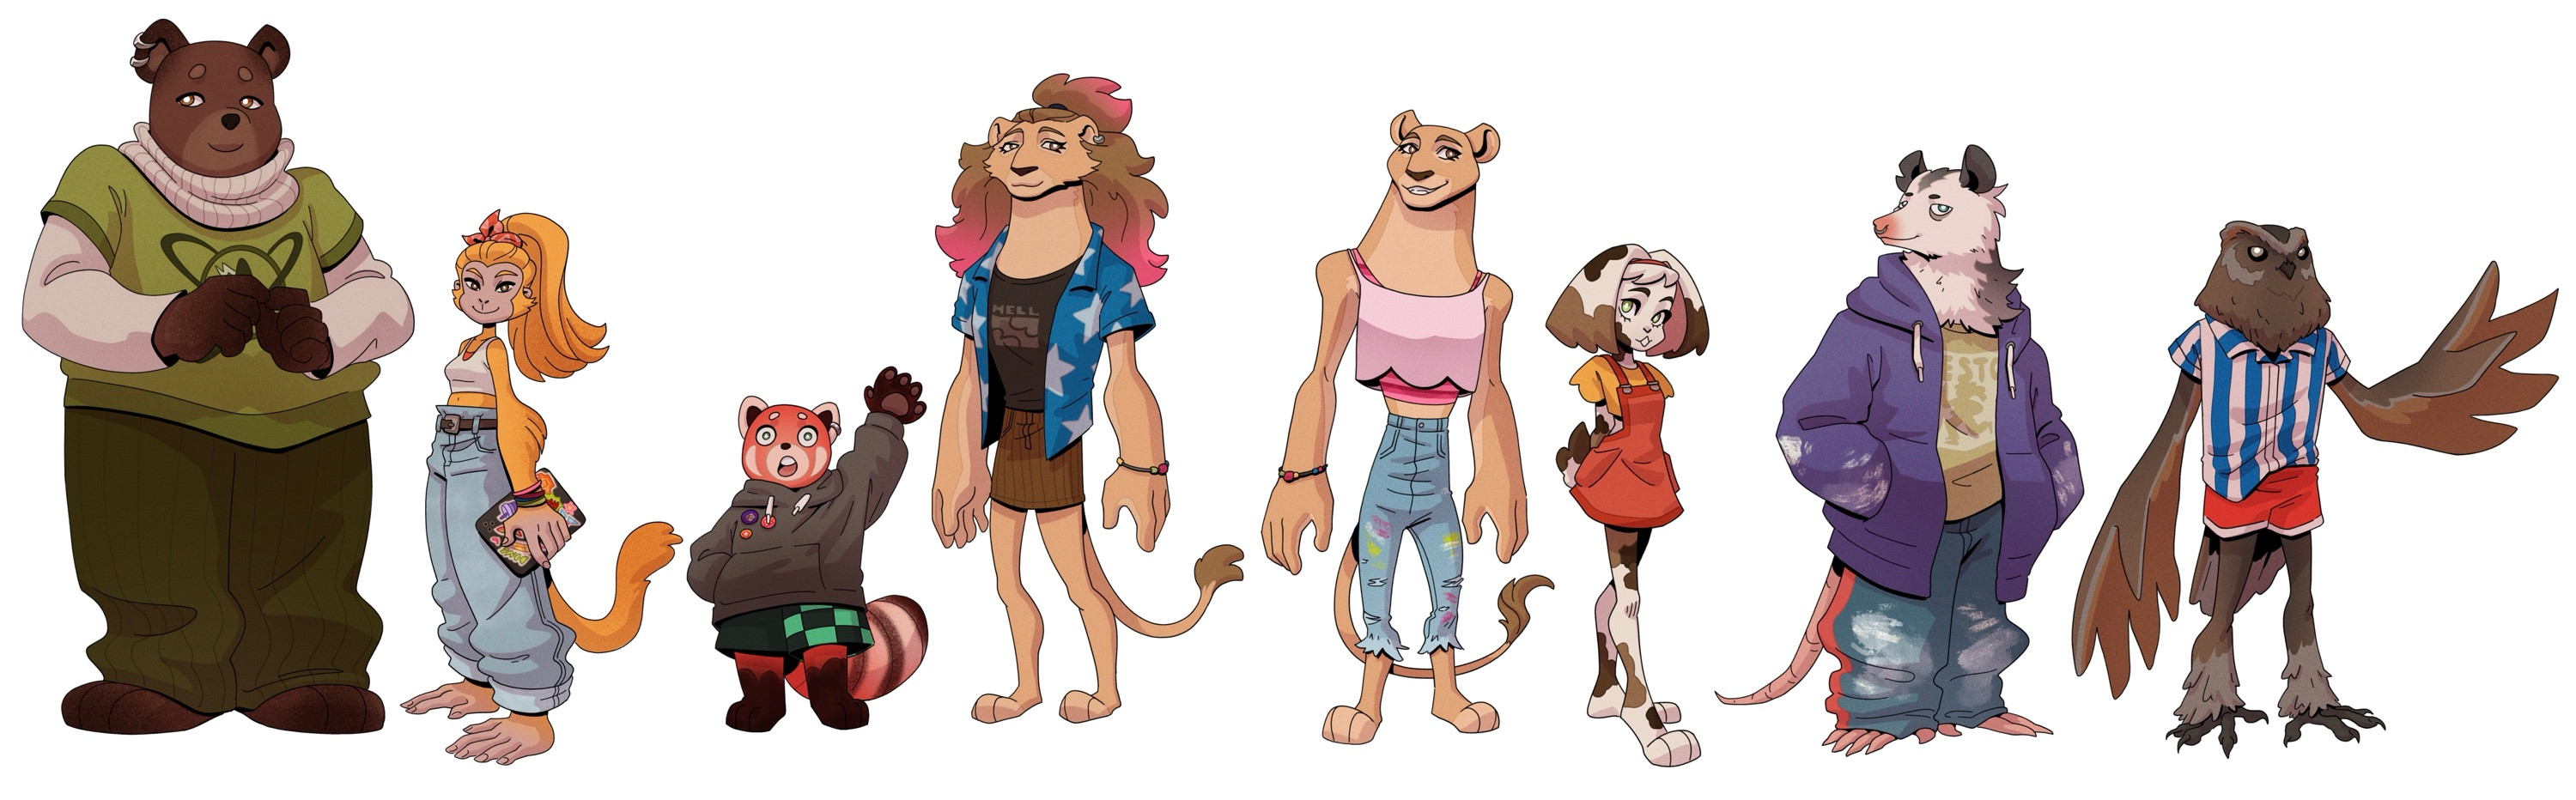 My main idea was that the two lionesses are sisters (twins) and the rest are their group of friends from their respective course/major.